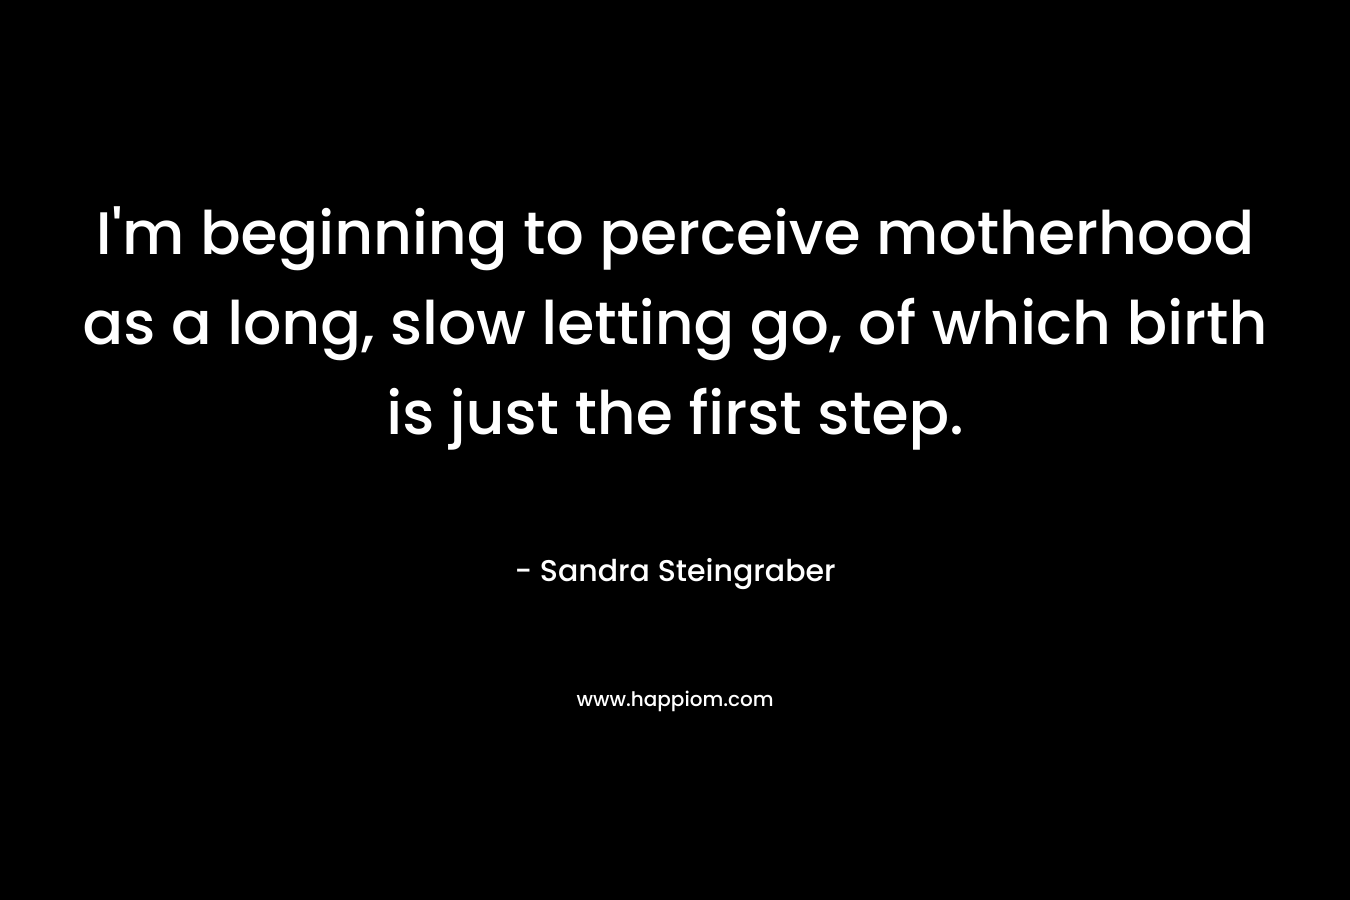 I'm beginning to perceive motherhood as a long, slow letting go, of which birth is just the first step.